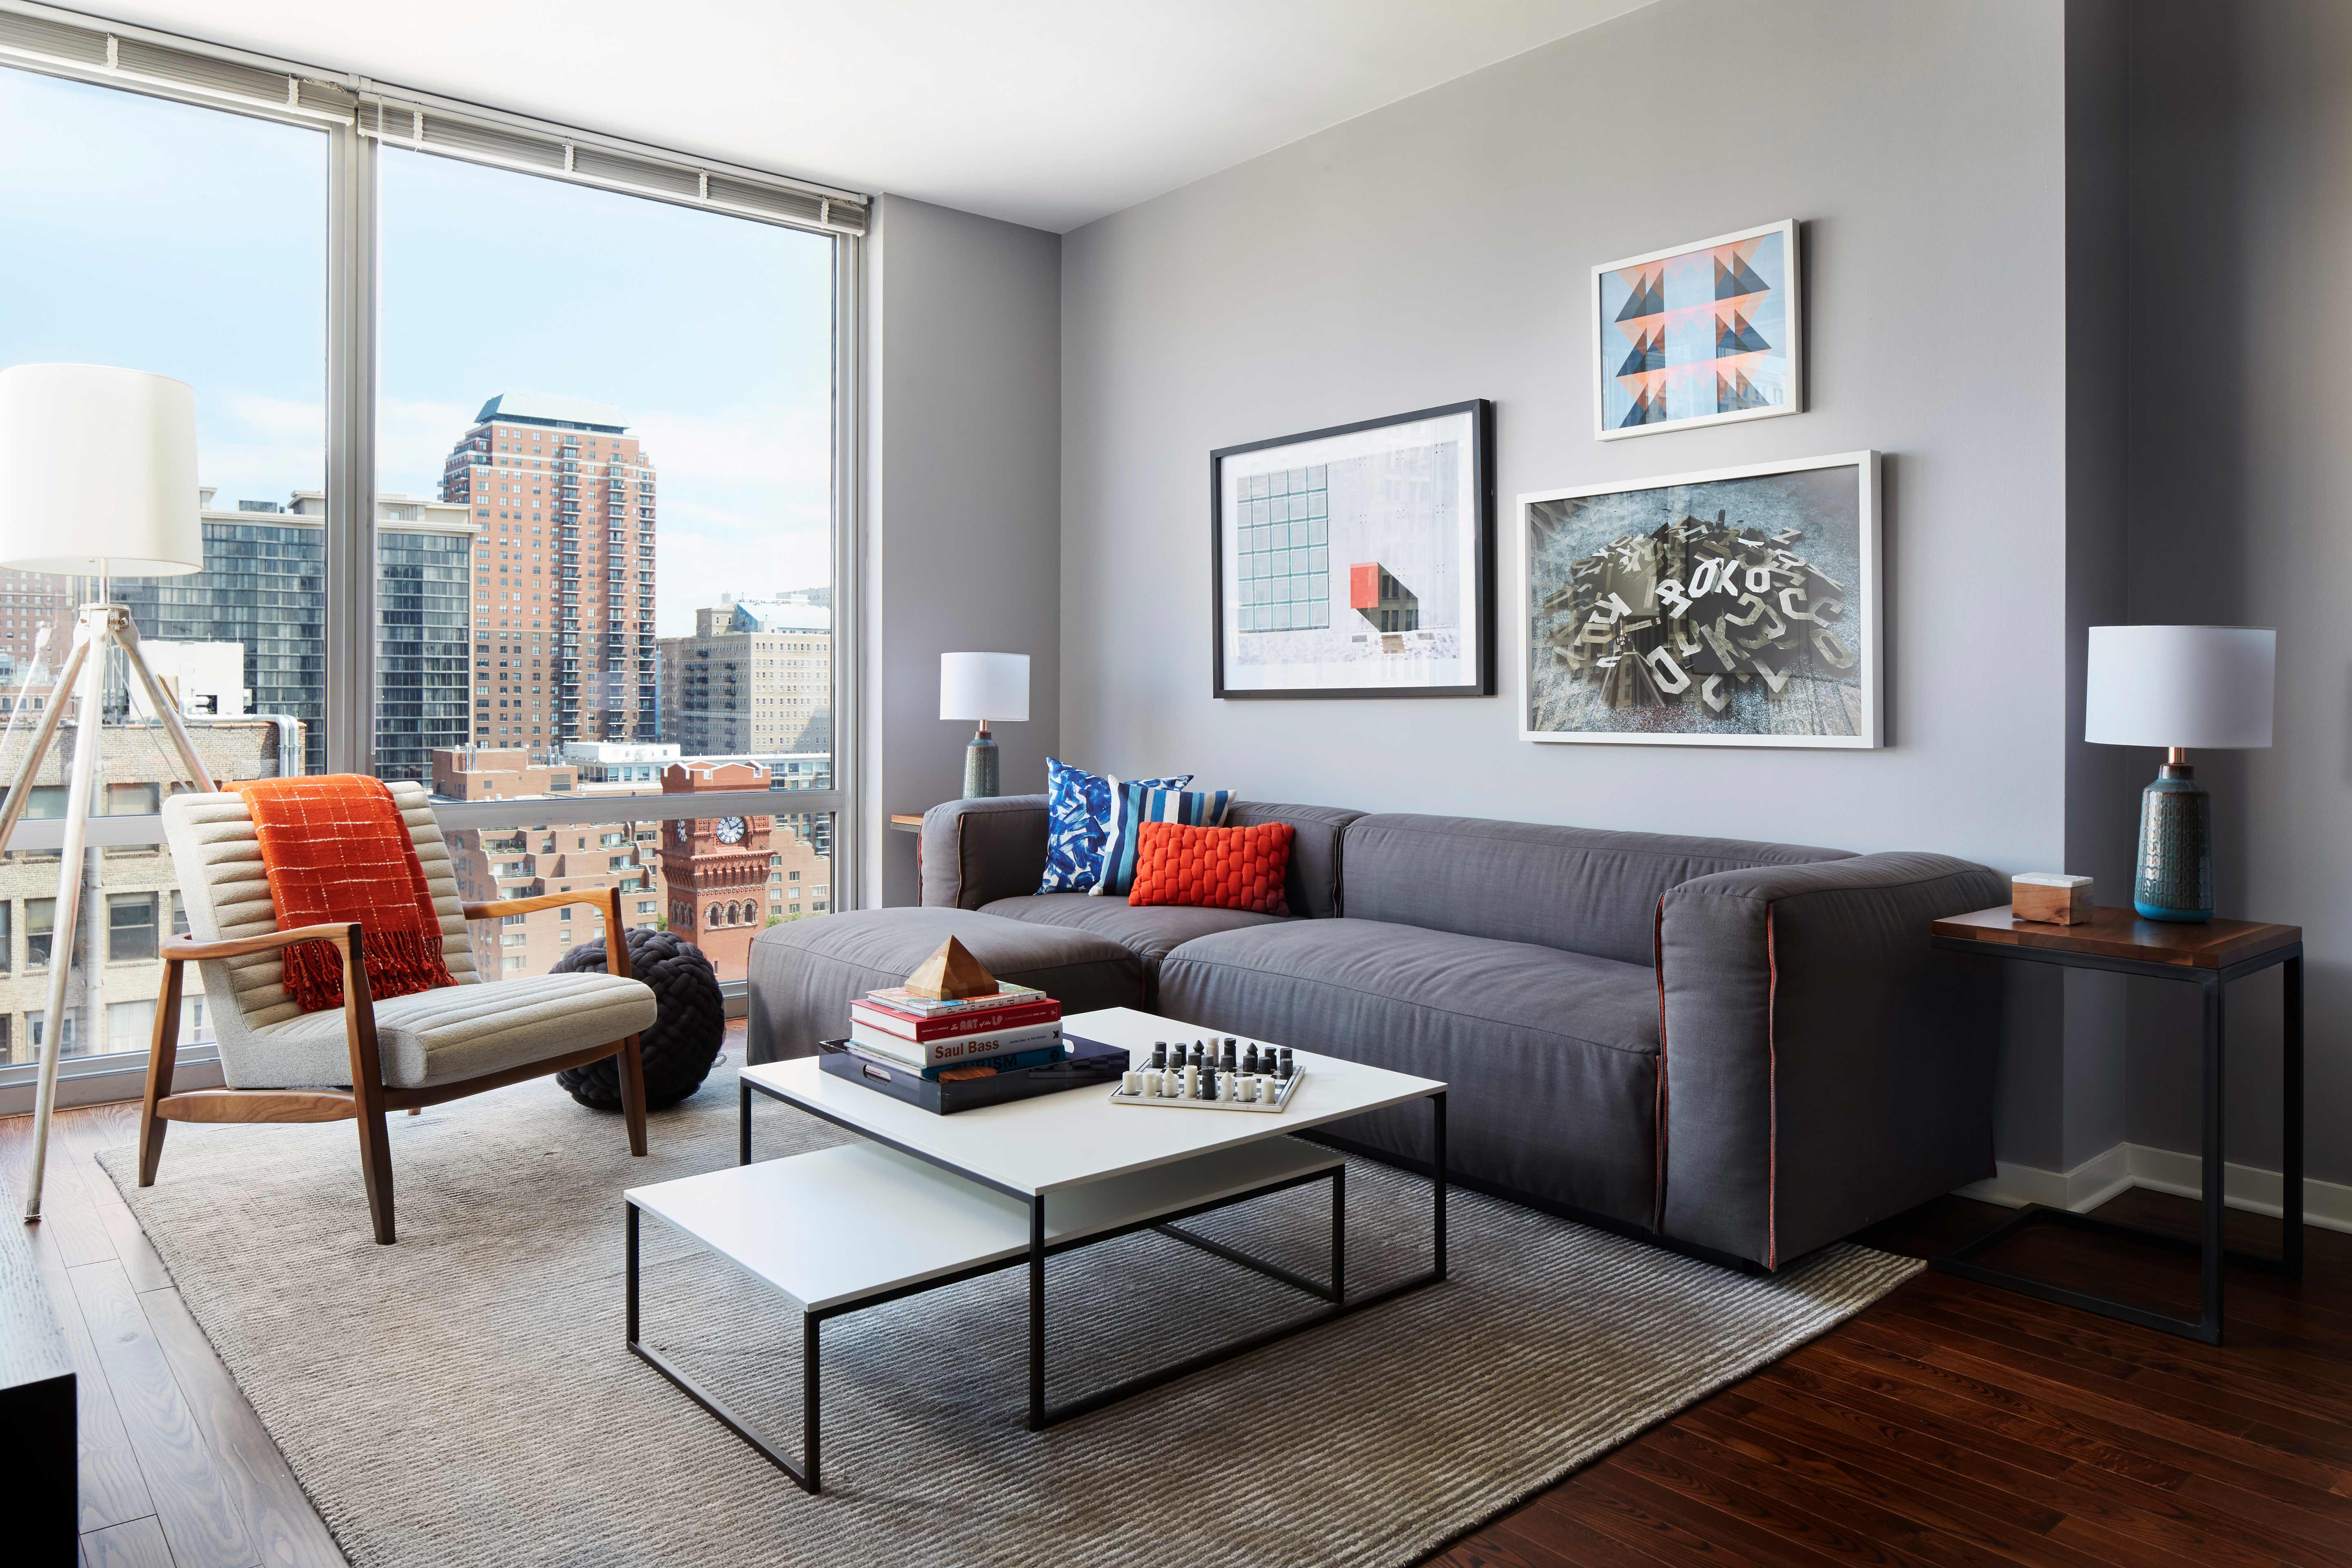 Burnham Pointe's Model Unit Transformation in Chicago - Soucie Horner, Ltd, incorporating Blu Dot Sectional, Room and Board Armchair, and Pair of Nesting Tables from Bo Concept.